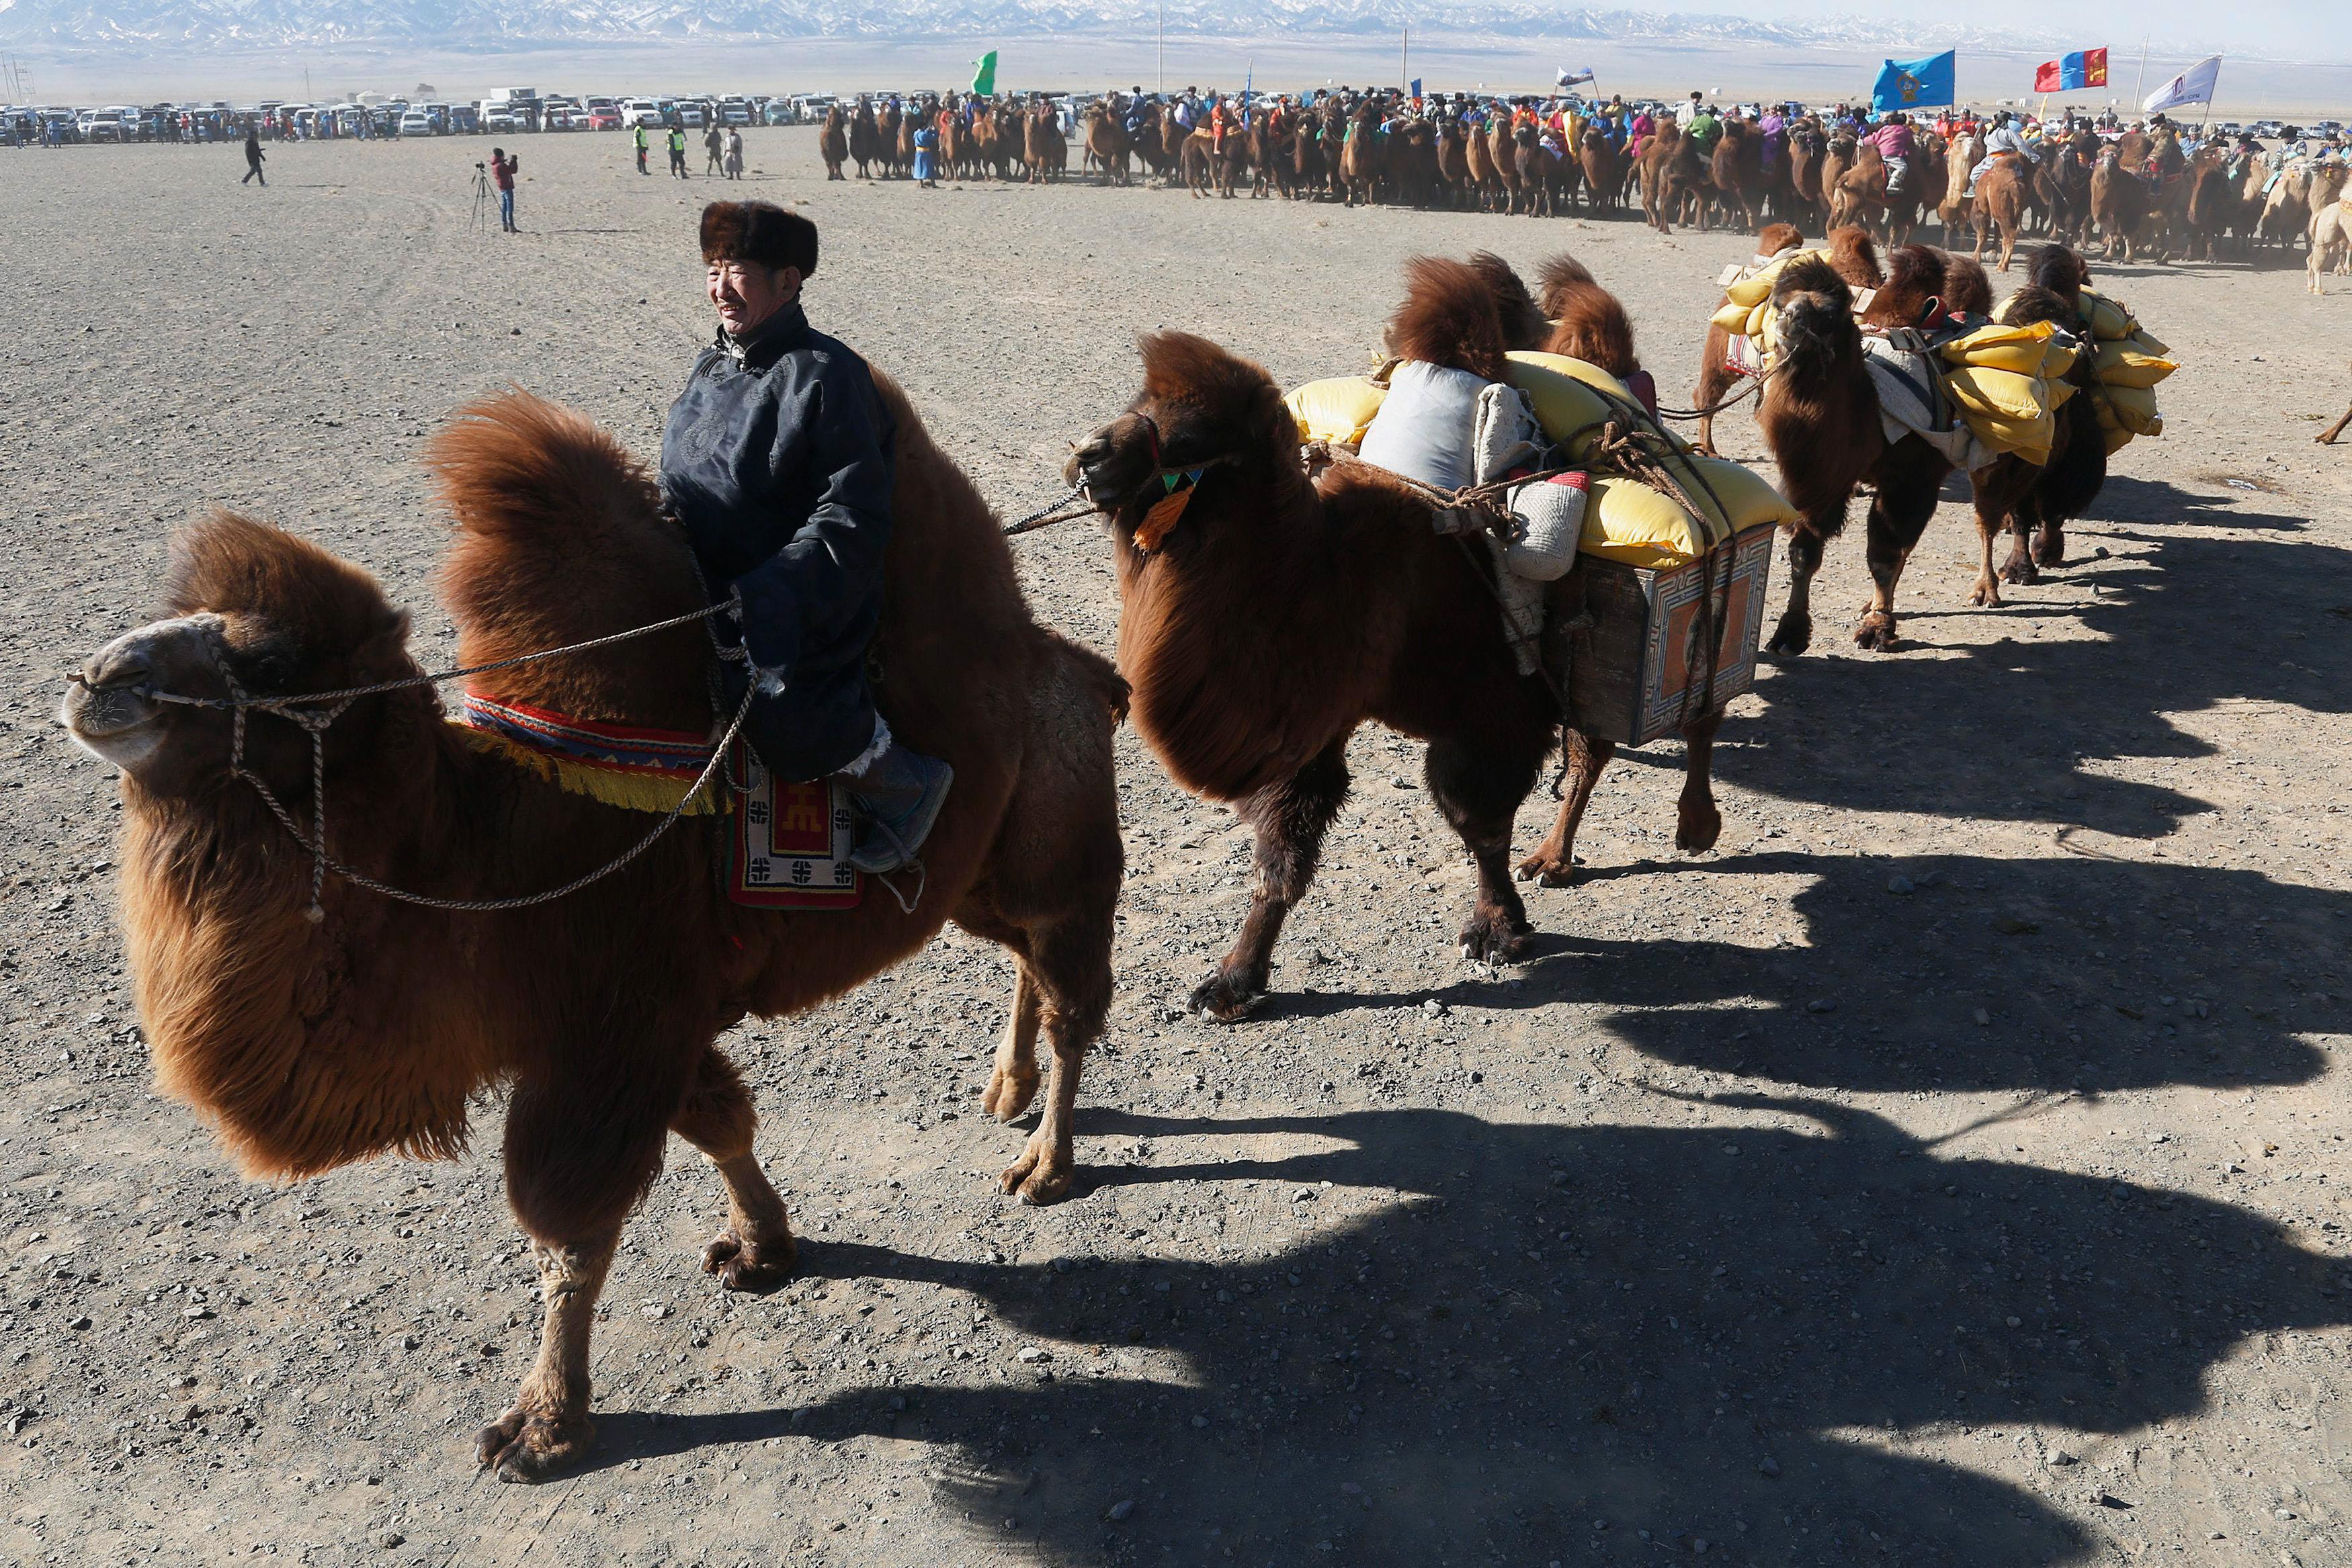 The Wider Image: Mongolia's camel festival